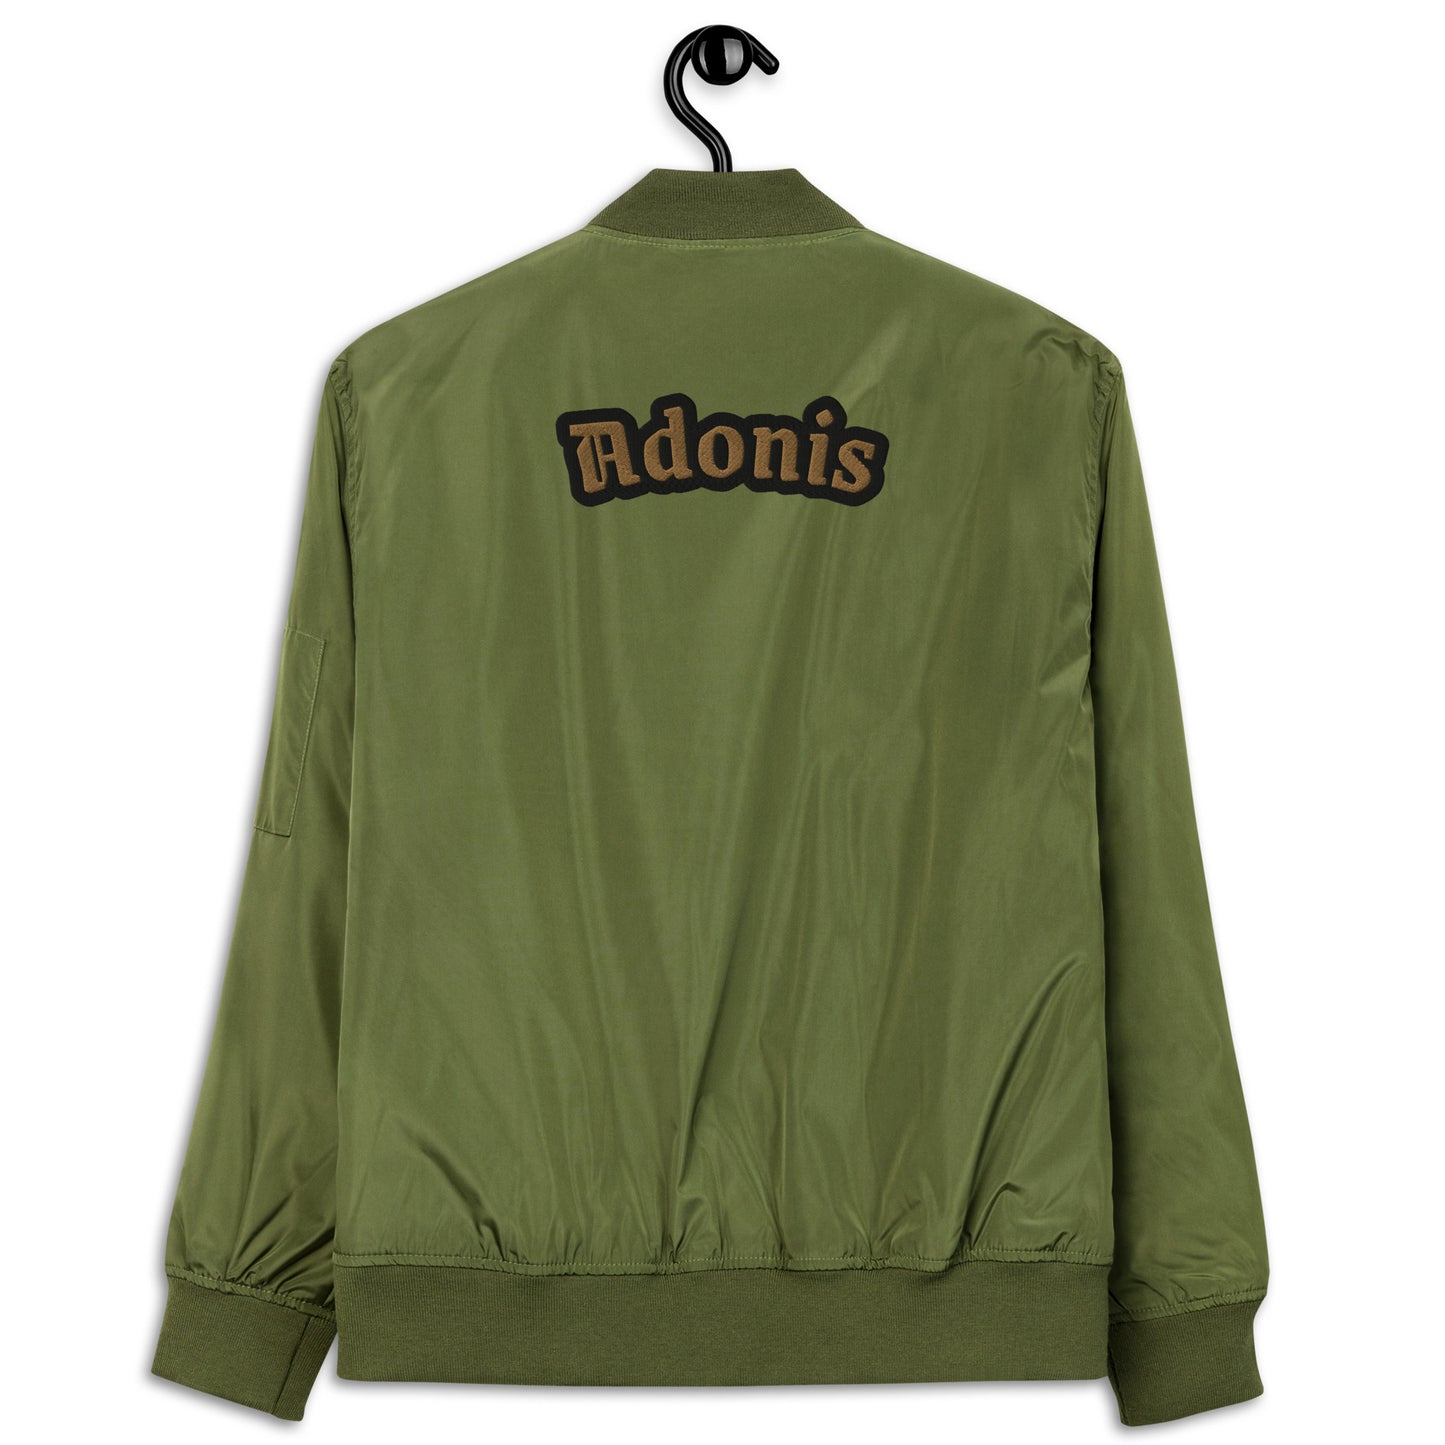 Adonis-Creations - Premium Recycled Embroidered Bomber Jacket